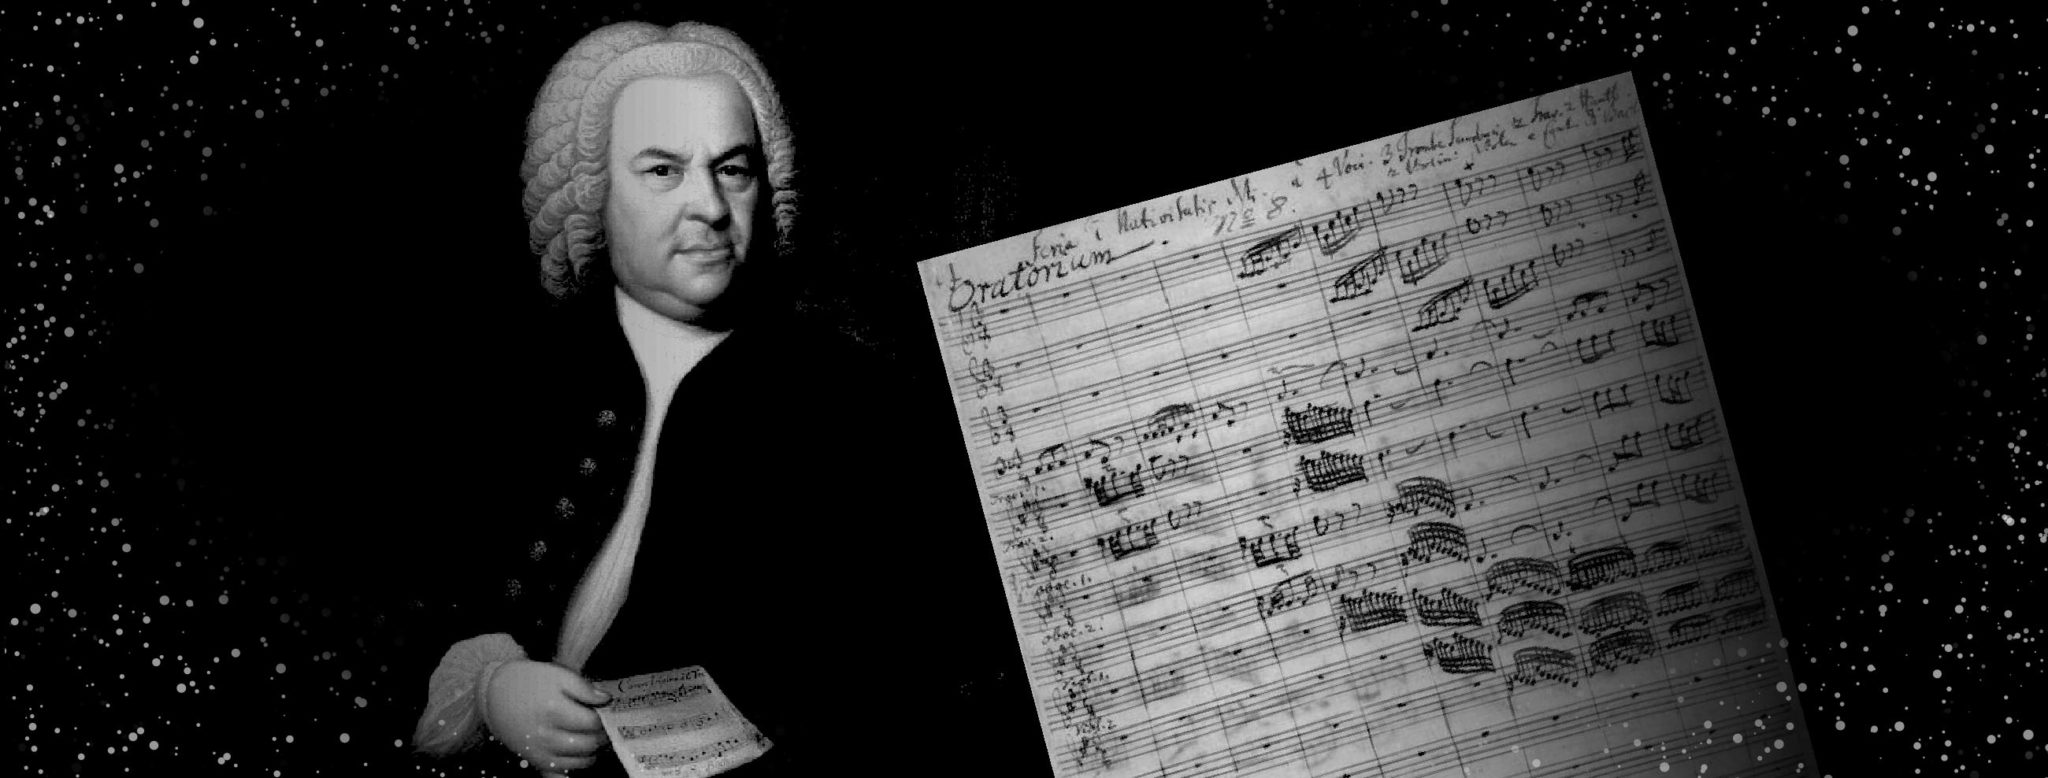 Photo of Bach Manuscript via Petrucci Music Library. Photo of Bach via Wikimedia Commons. Graphic: Classical.org.